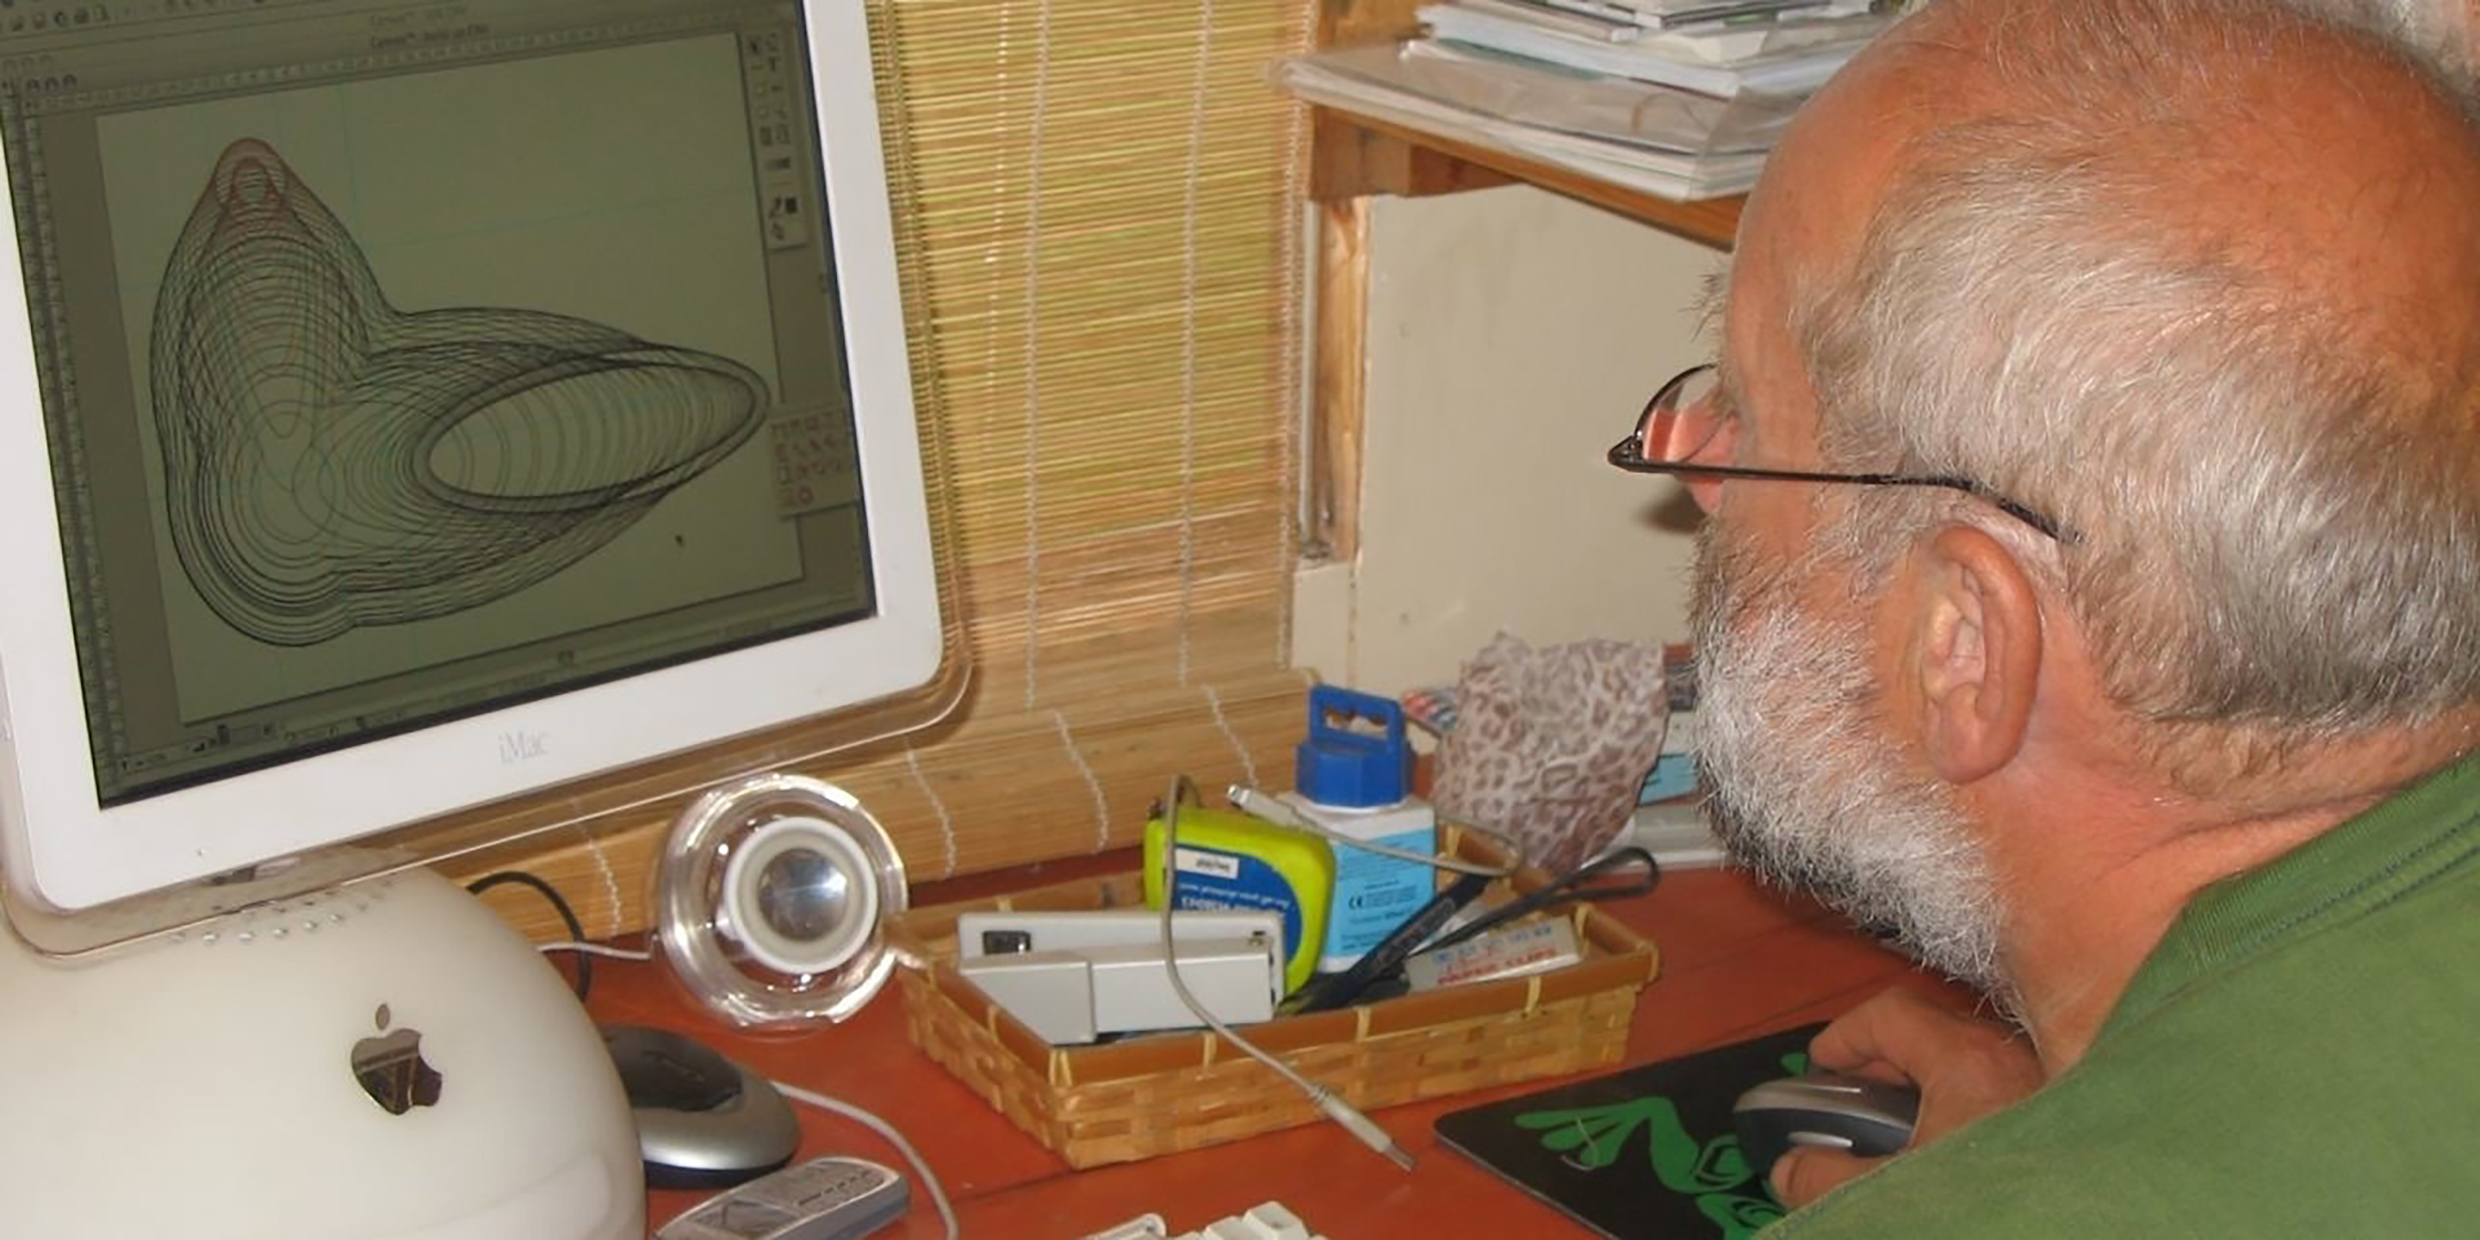 Image of the artist John Holstead designing a sculpture on his computer